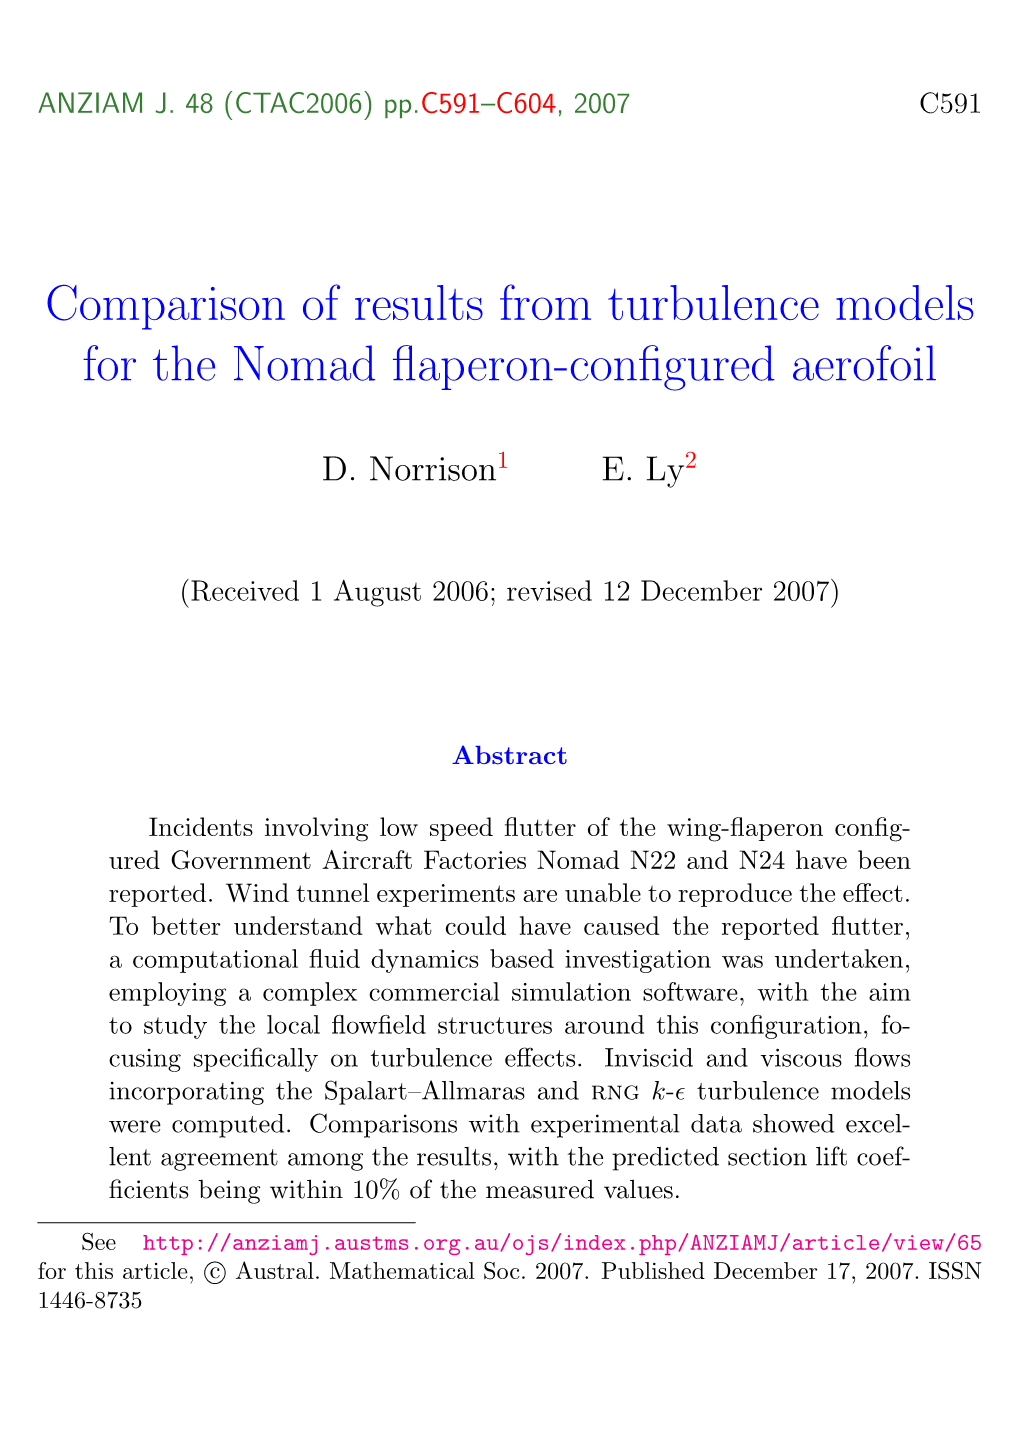 Comparison of Results from Turbulence Models for the Nomad Flaperon